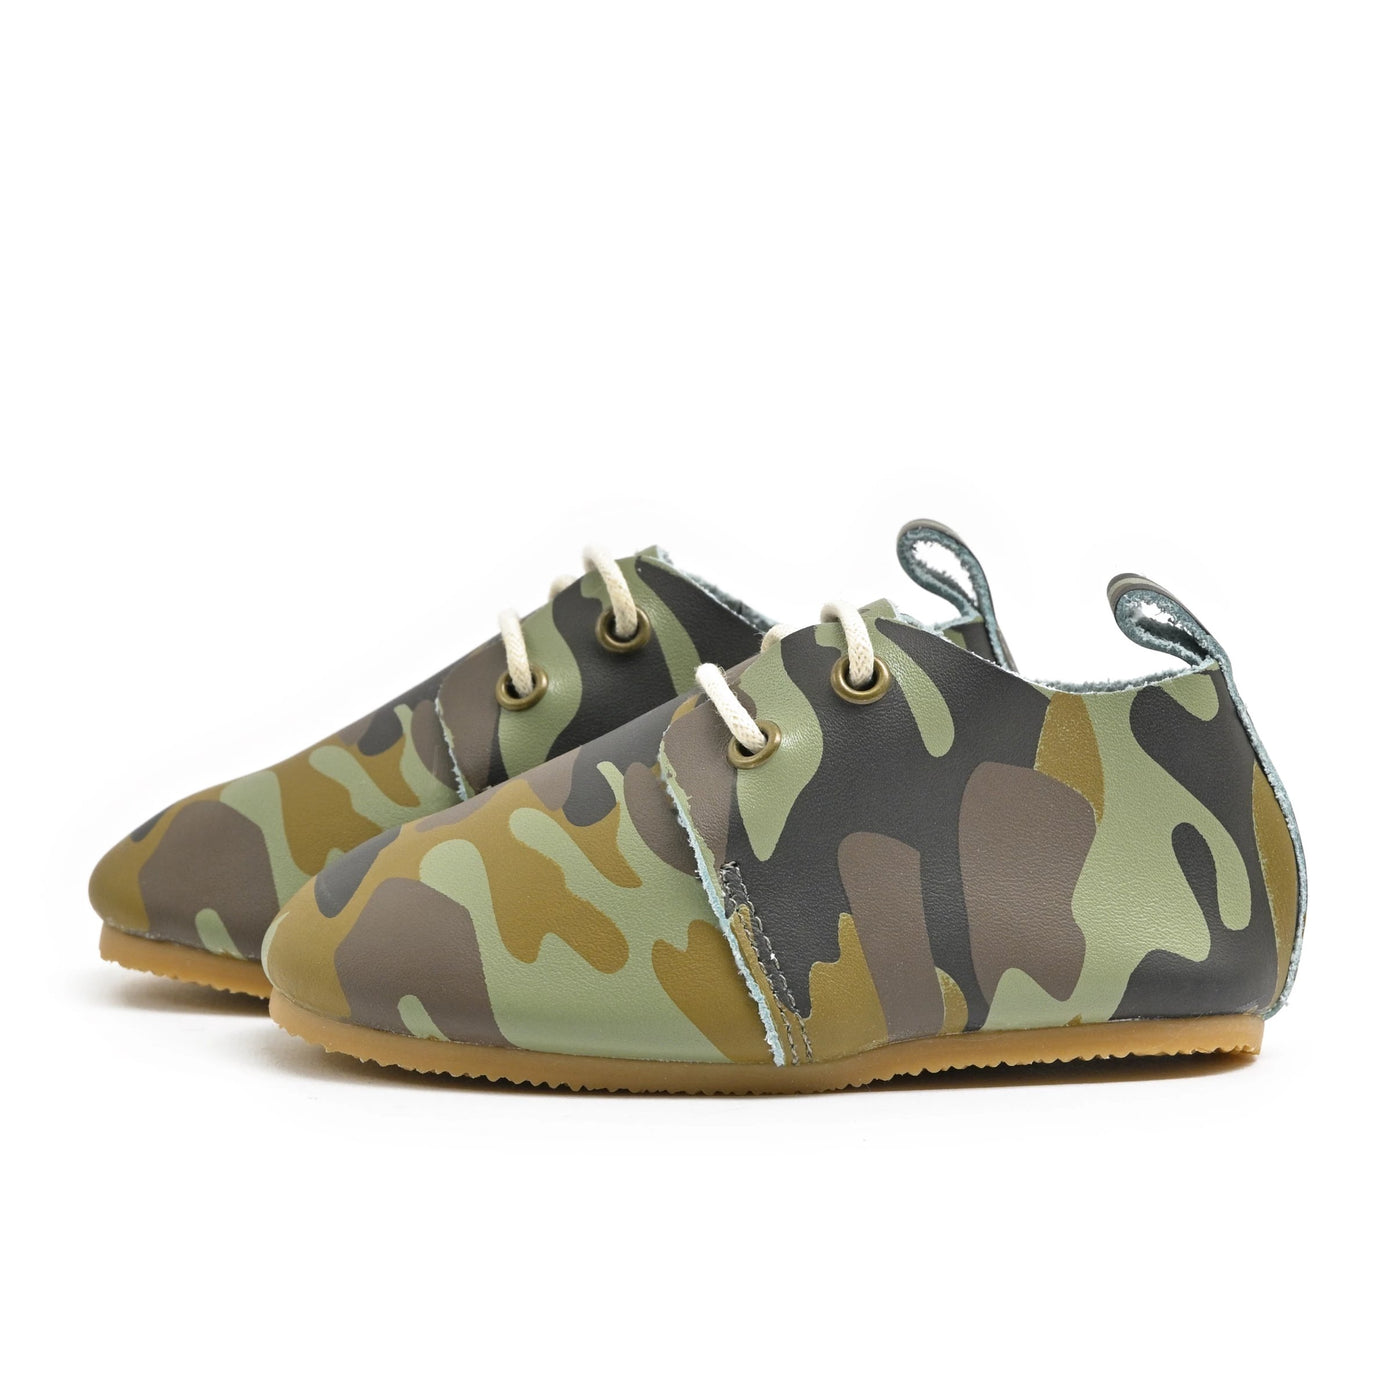 Camo - Low Top Oxfords - Hard Sole